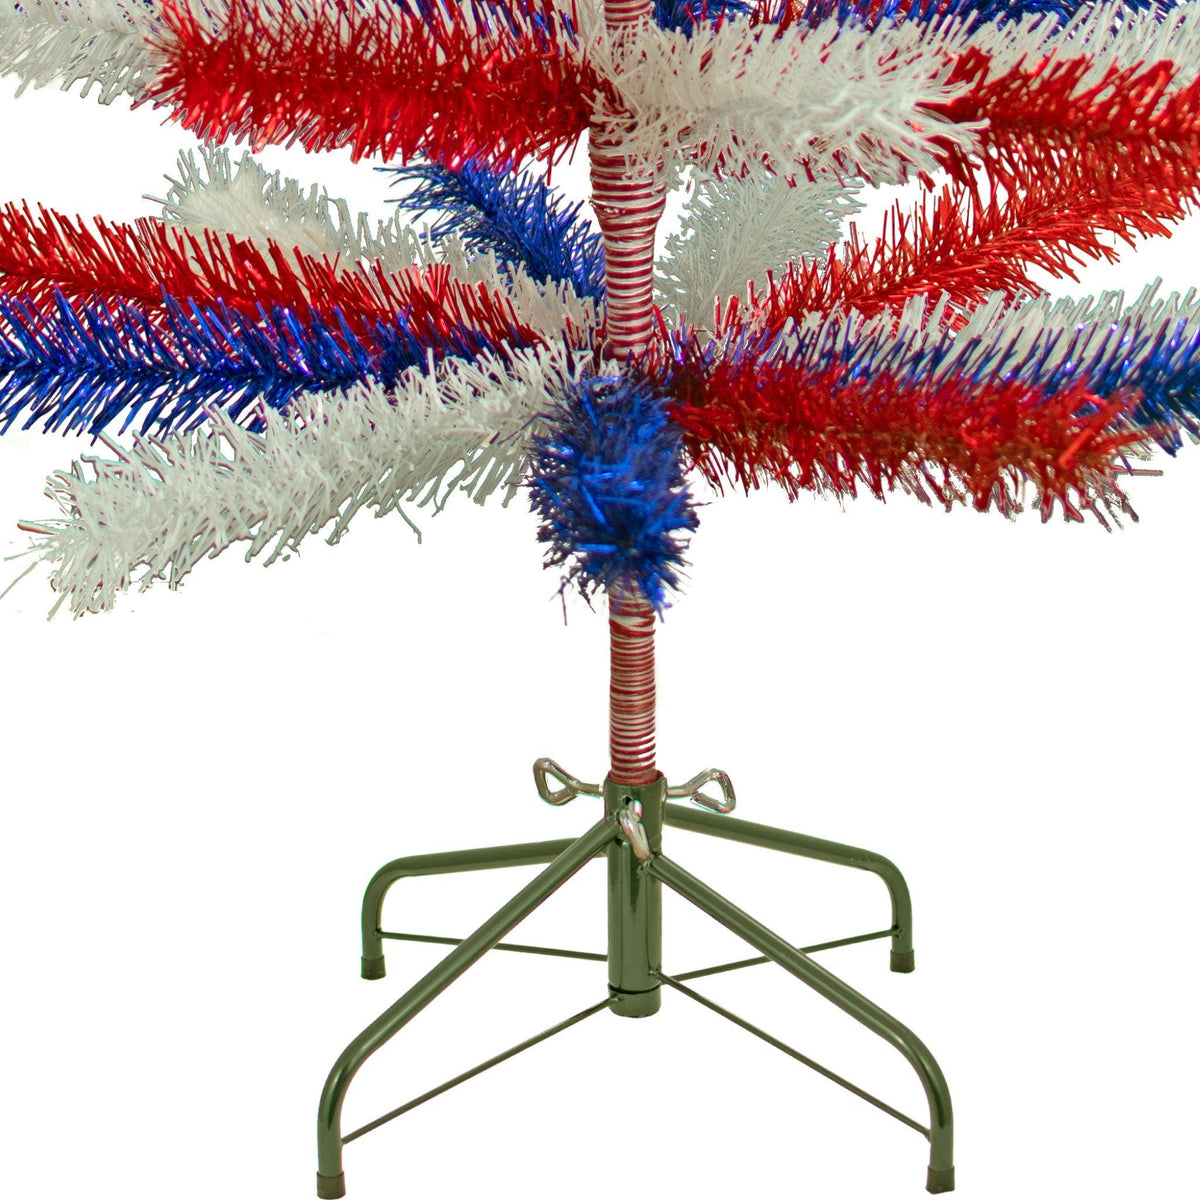 5FT Tall trees come with green metal stands. 60in Tall Red White and Blue Mixed Tinsel Christmas Tree on sale at leedisplay.com.